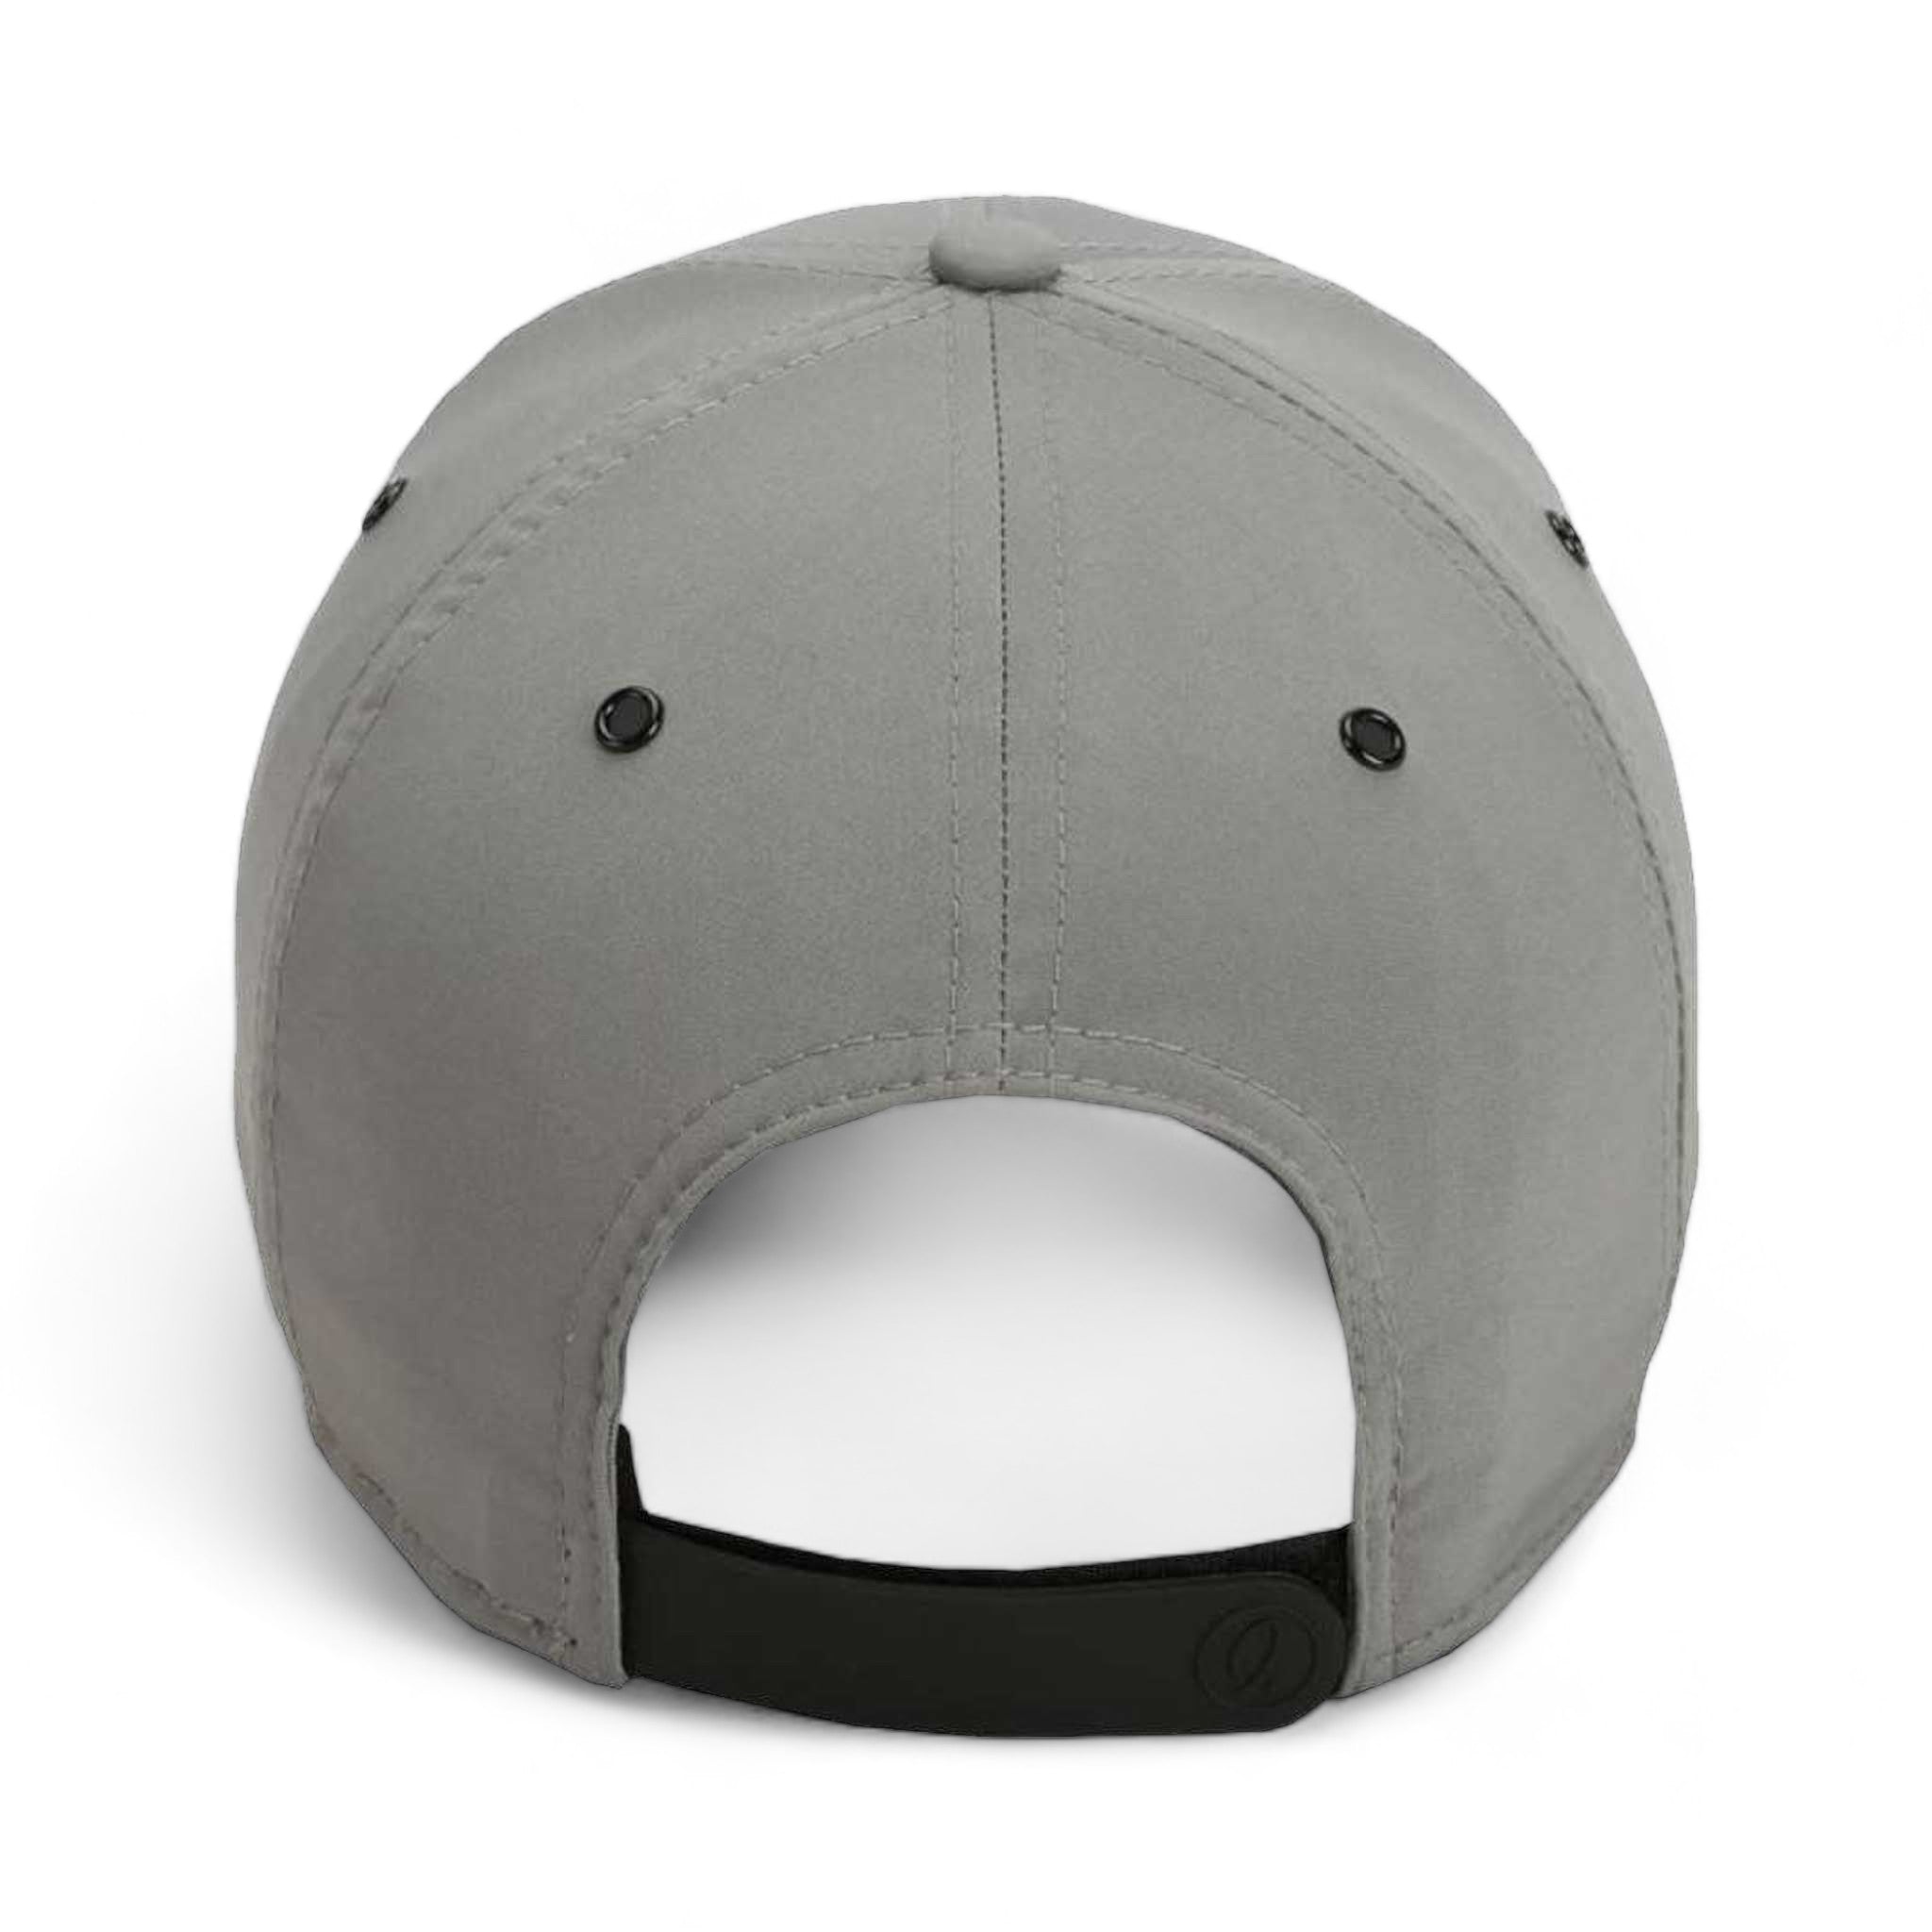 Back view of Imperial 6054 custom hat in grey